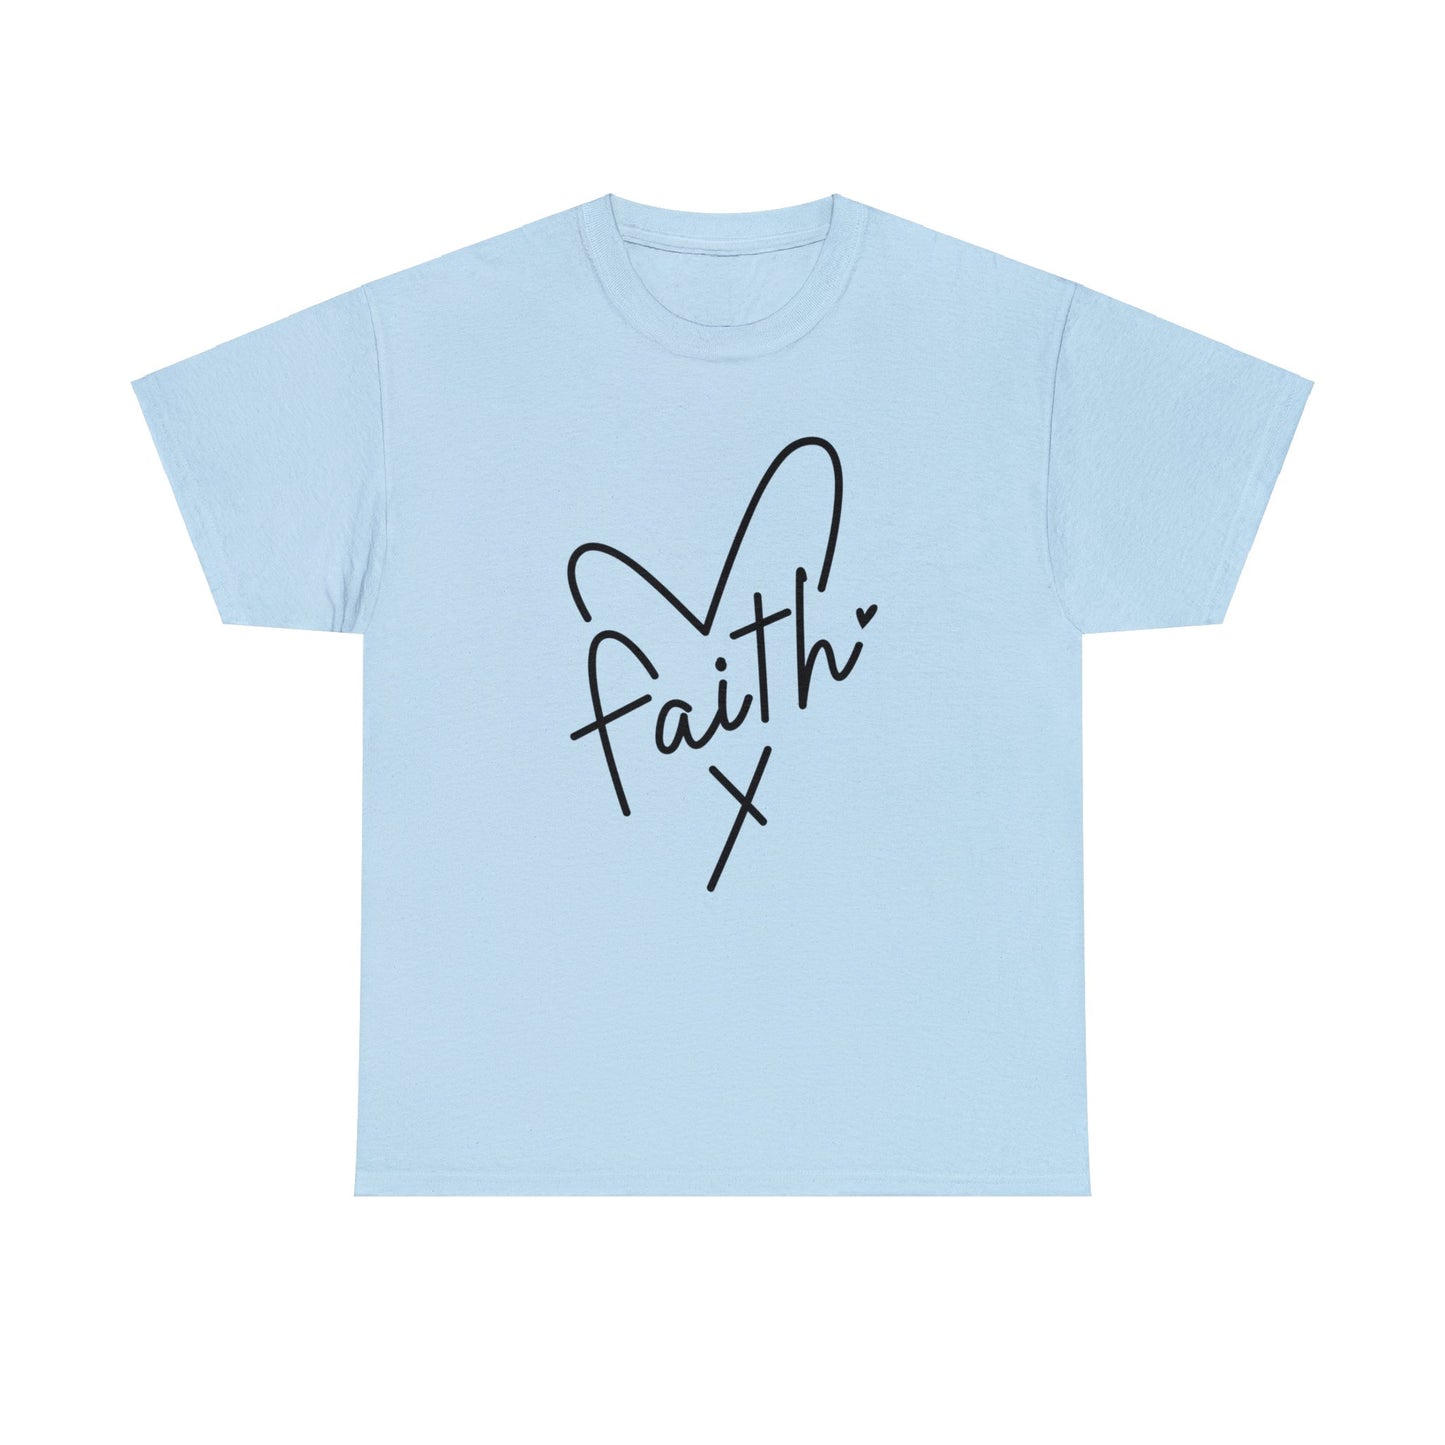 "Faith" T-Shirt - Weave Got Gifts - Unique Gifts You Won’t Find Anywhere Else!